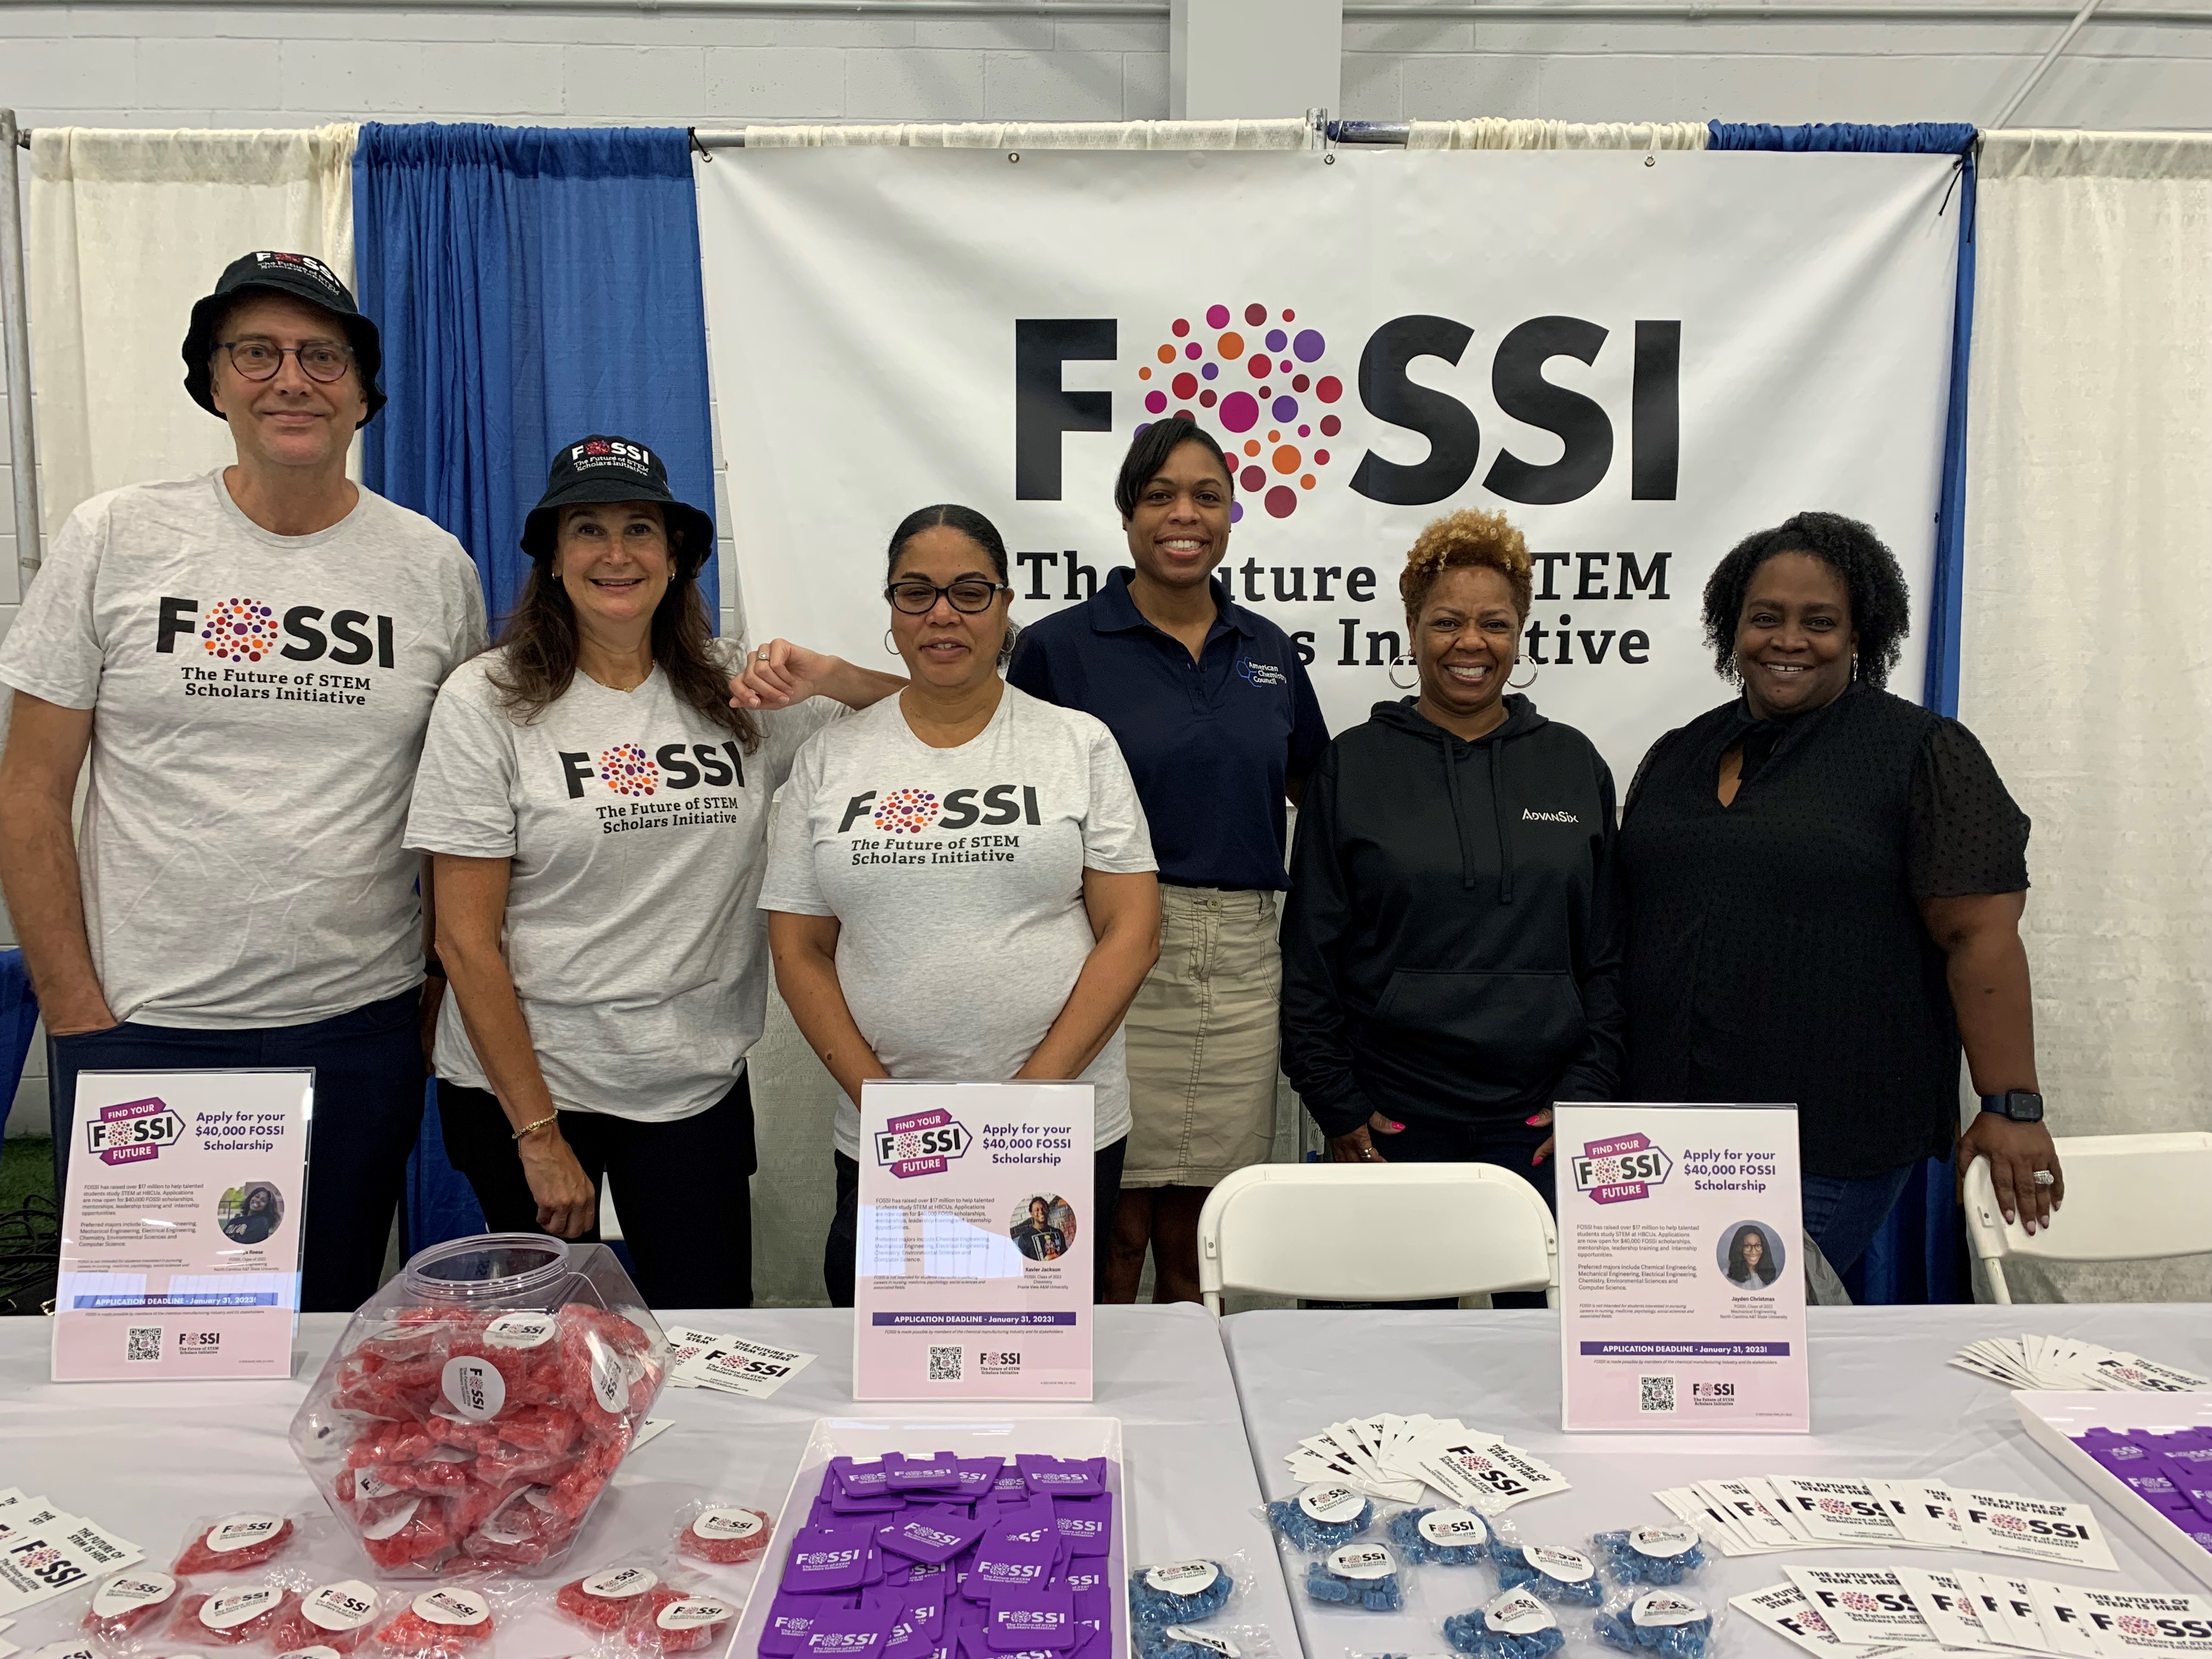 The FOSSI booth at HBCU Week